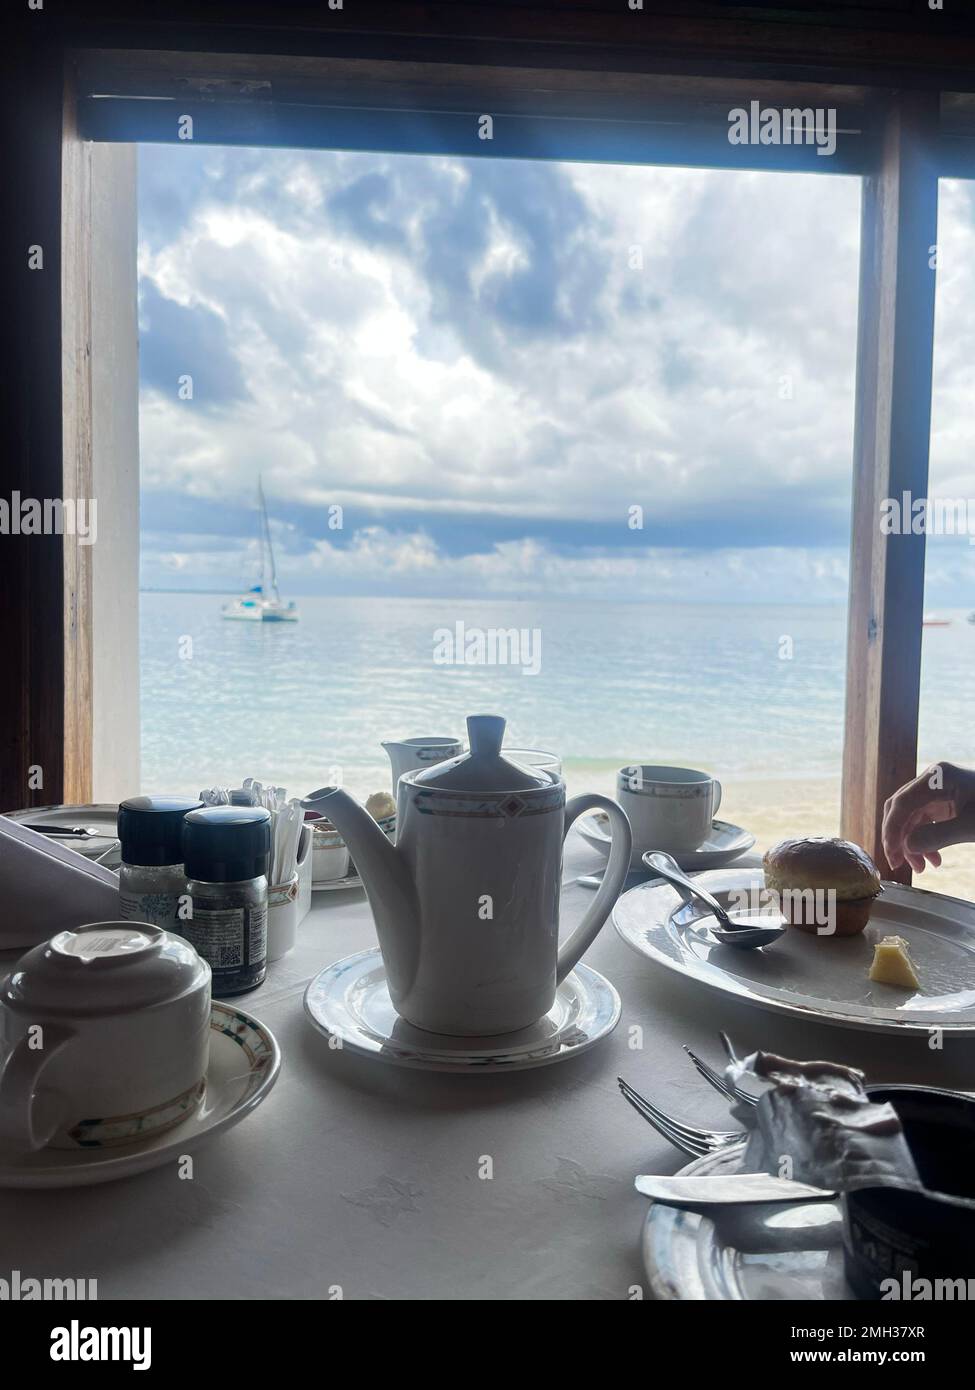 tourism having tea time in front of the beach, afternoon tea time in the hotel with beach window view. Zanzibar, Tanzania. Stock Photo